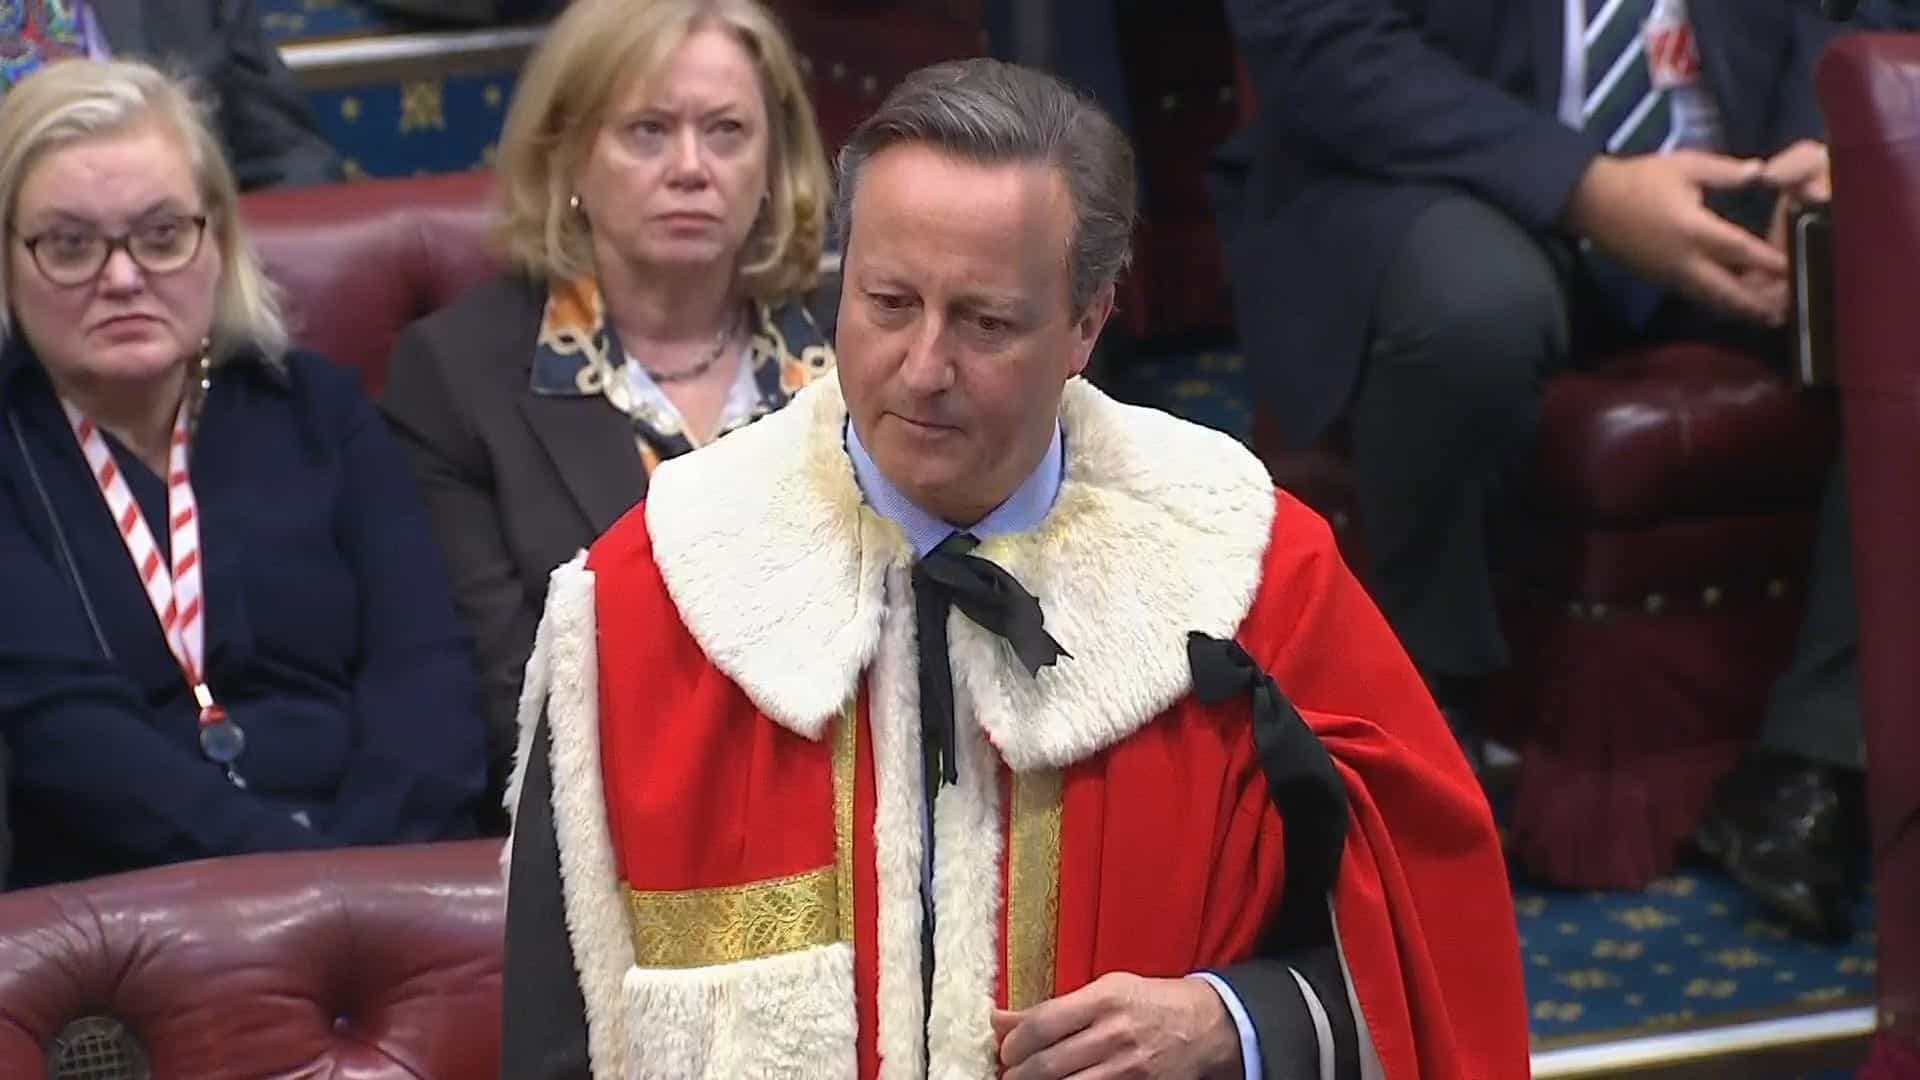 David Cameron takes seat in House of Lords after Foreign Secretary appointment